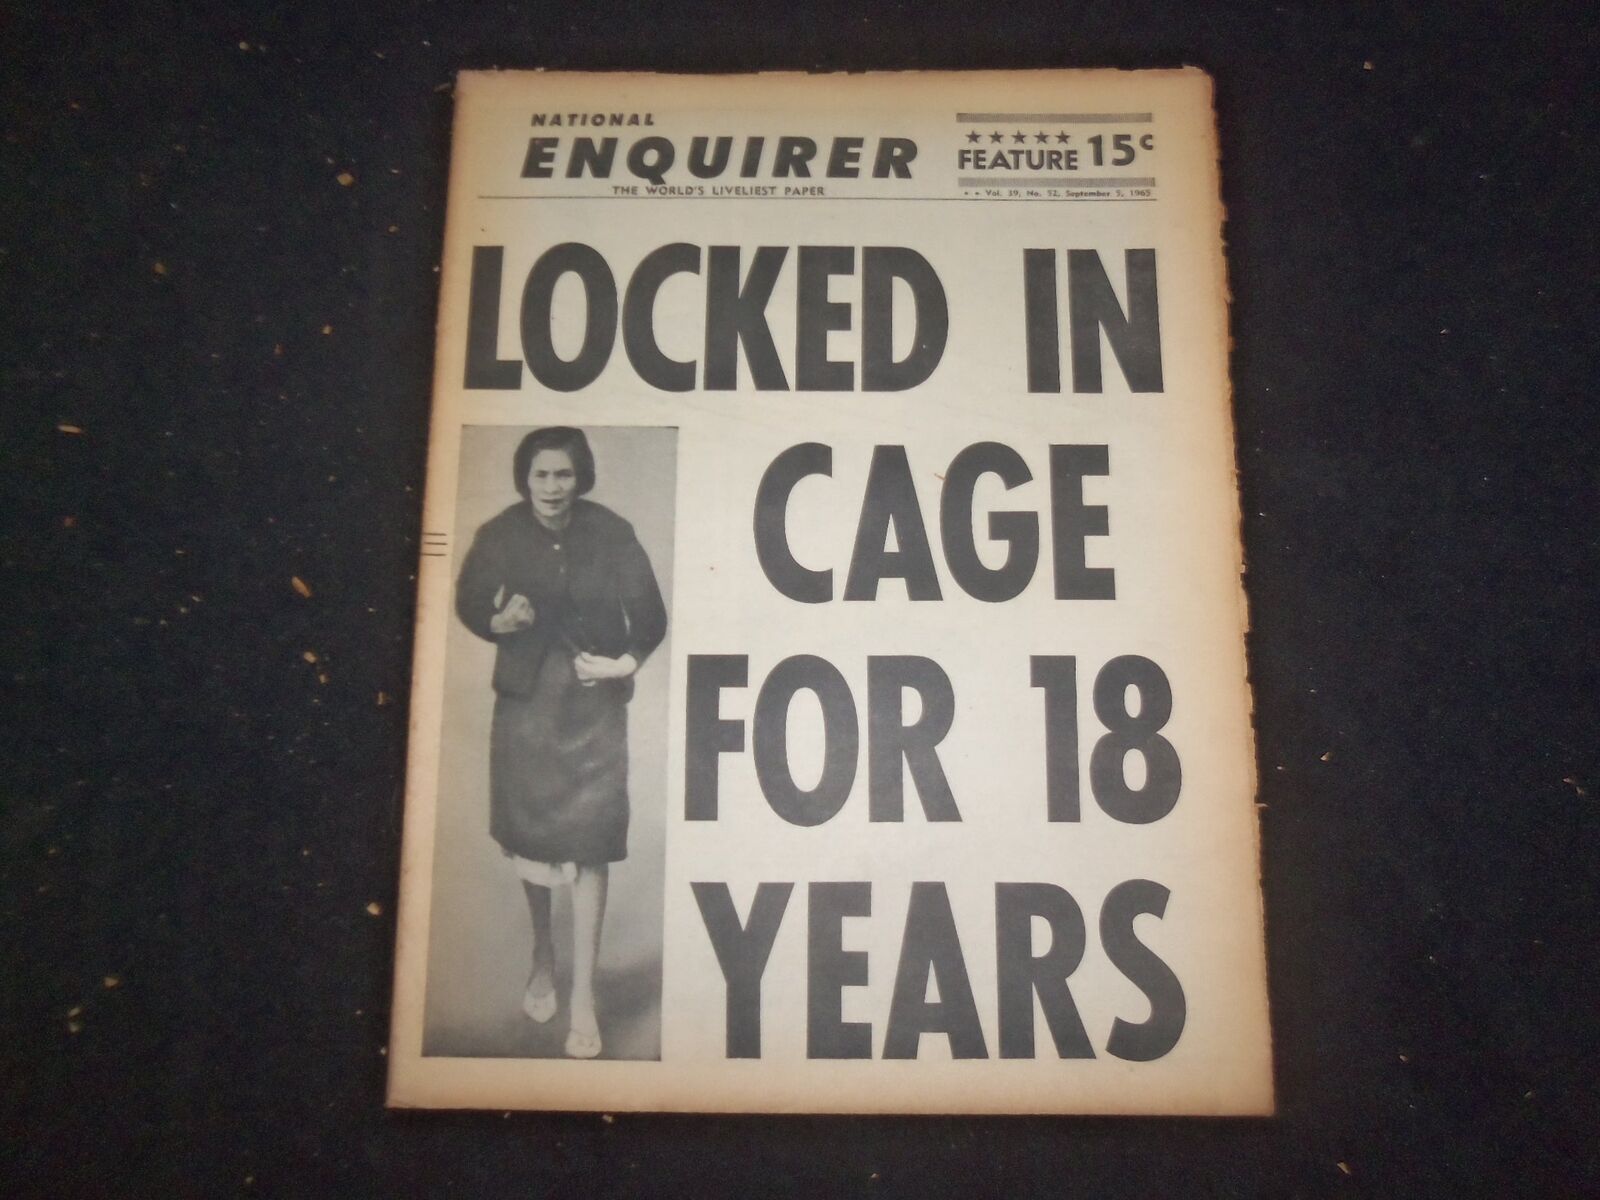 1965 SEP 5 NATIONAL ENQUIRER NEWSPAPER - LOCKED IN CAGE FOR 18 YEARS - NP 7392